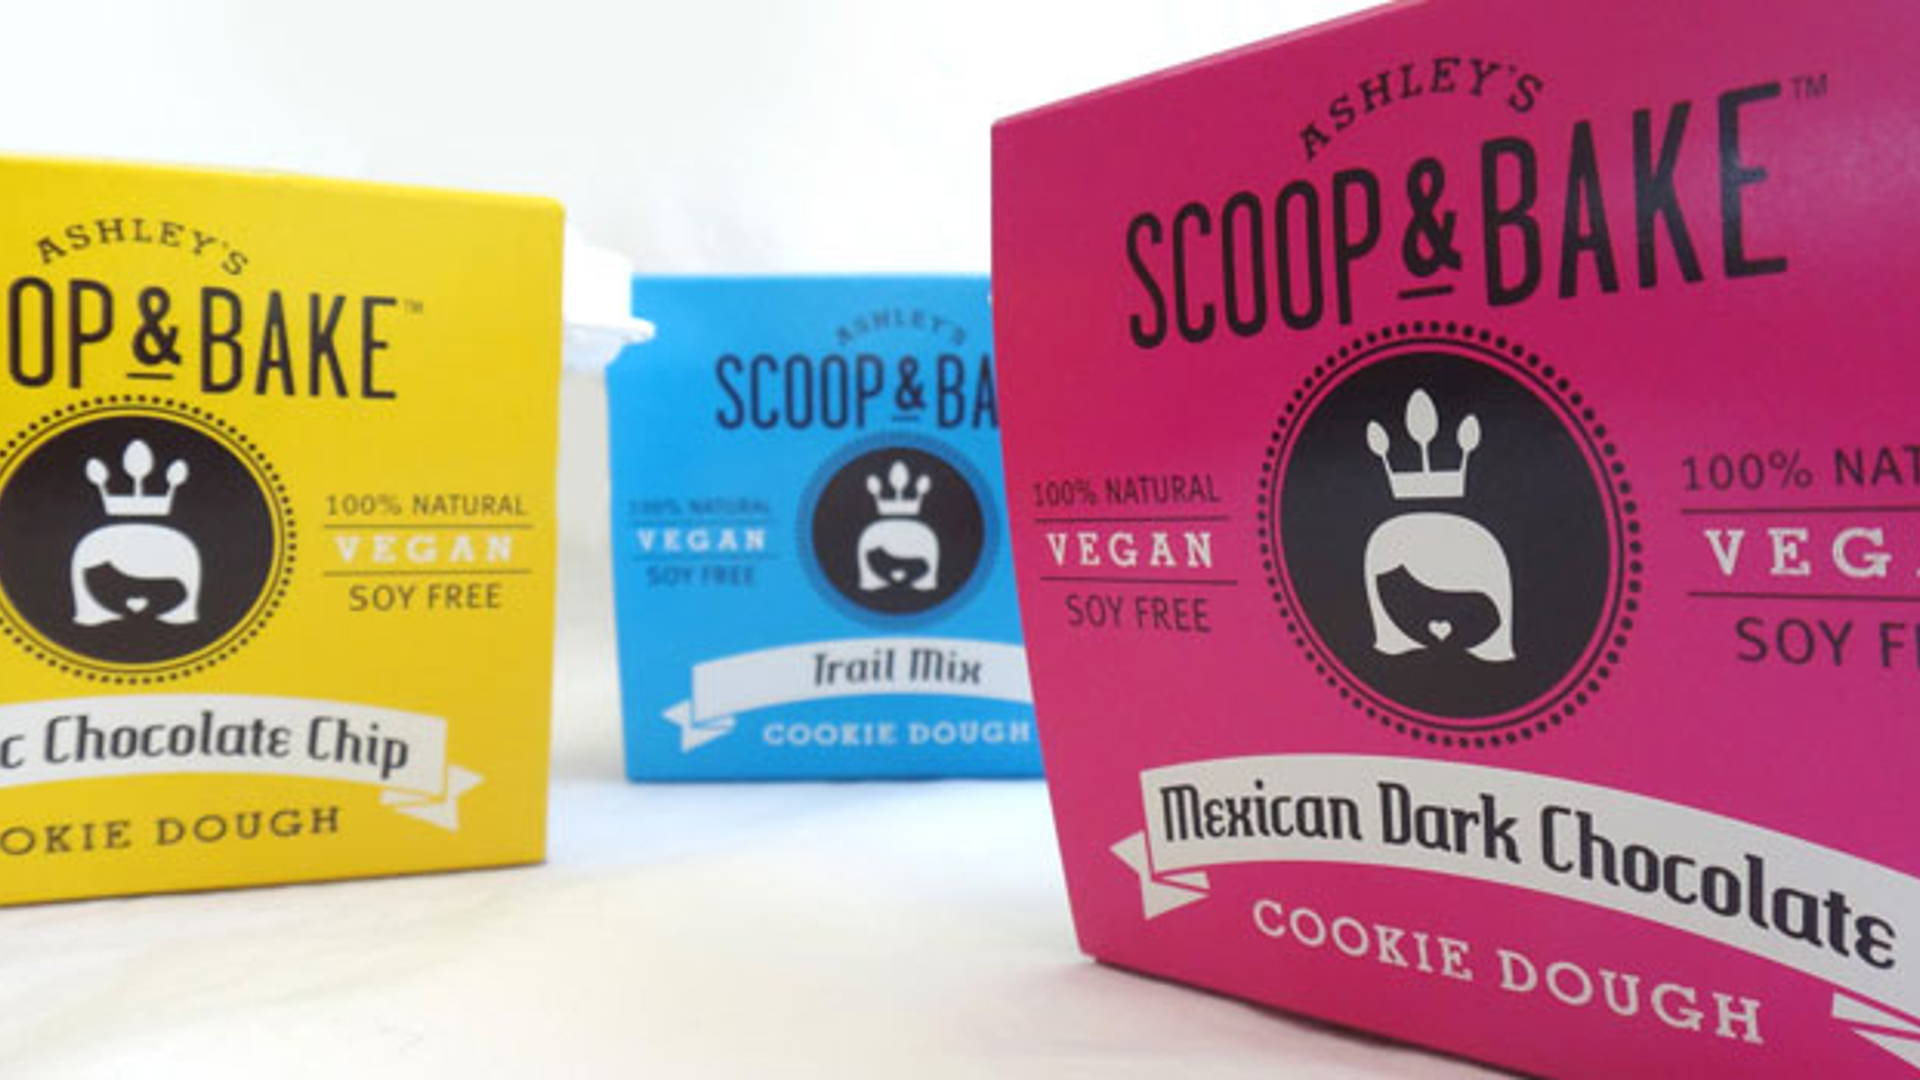 Featured image for Ashley's Scoop & Bake Cookie Dough